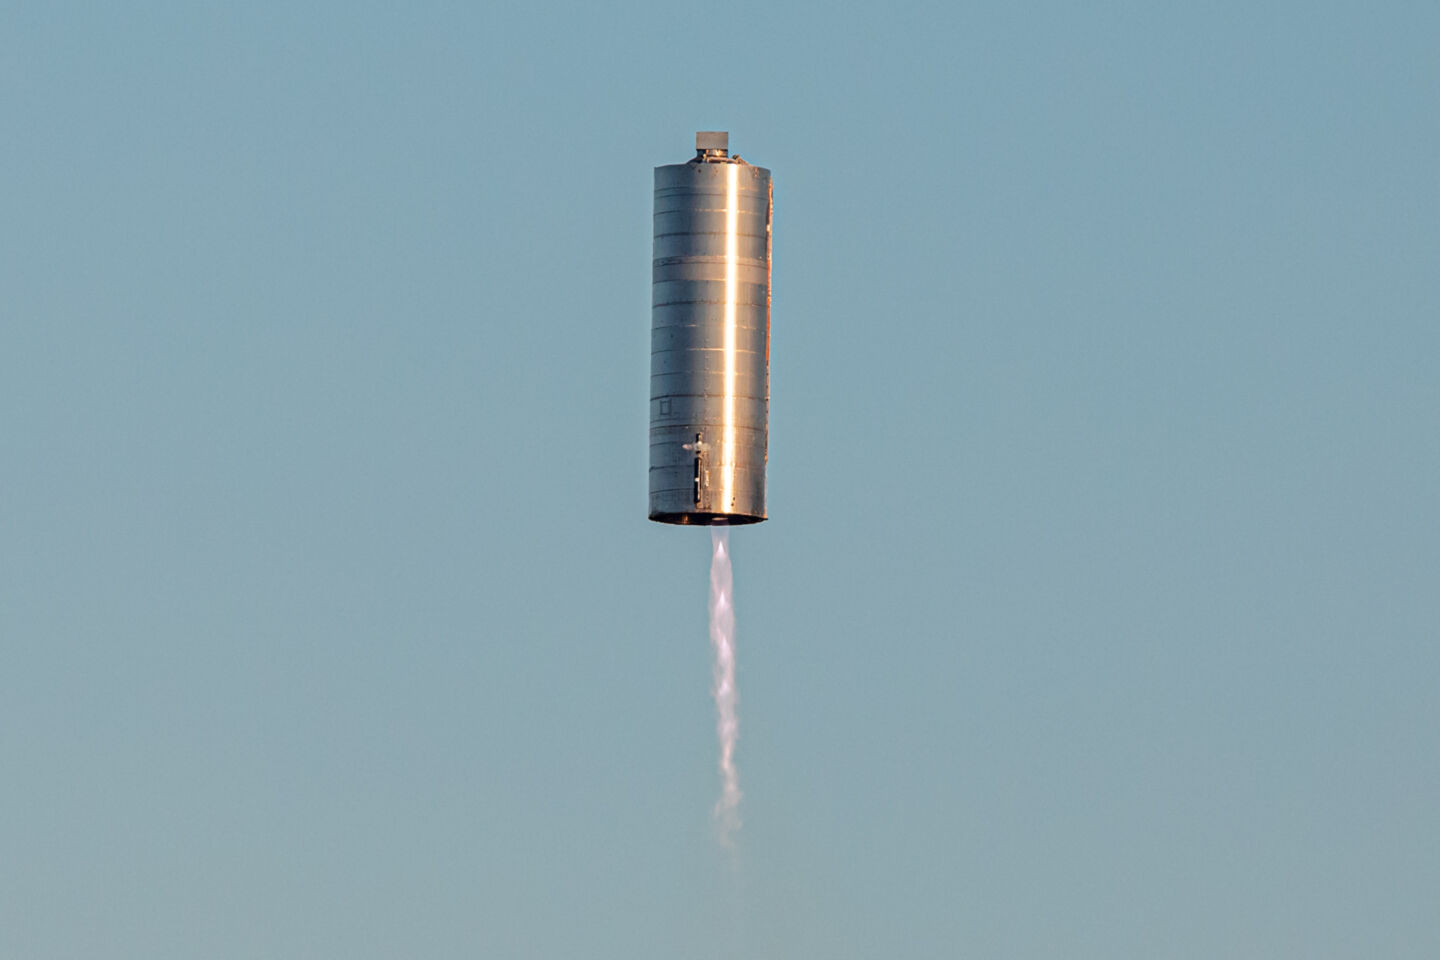 20200906.SpaceX-hops-a-full-scale-Starship-prototype-for-the-second-time-04.jpg